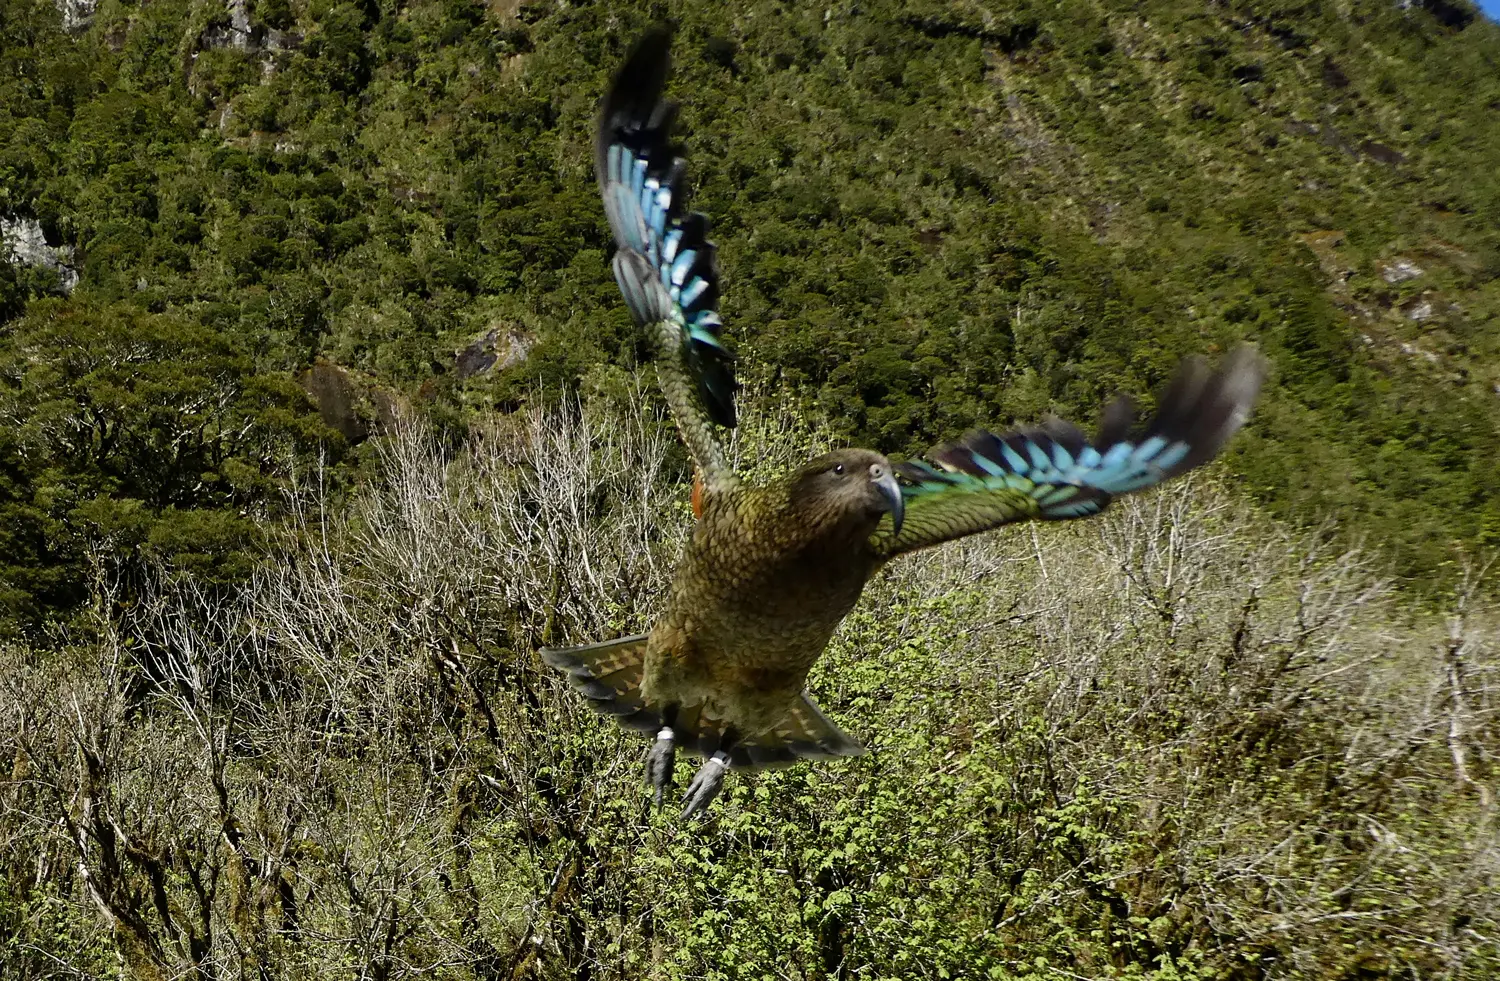 A kea in full flight photographed by Fiordland Tours guest, Richard Knight.